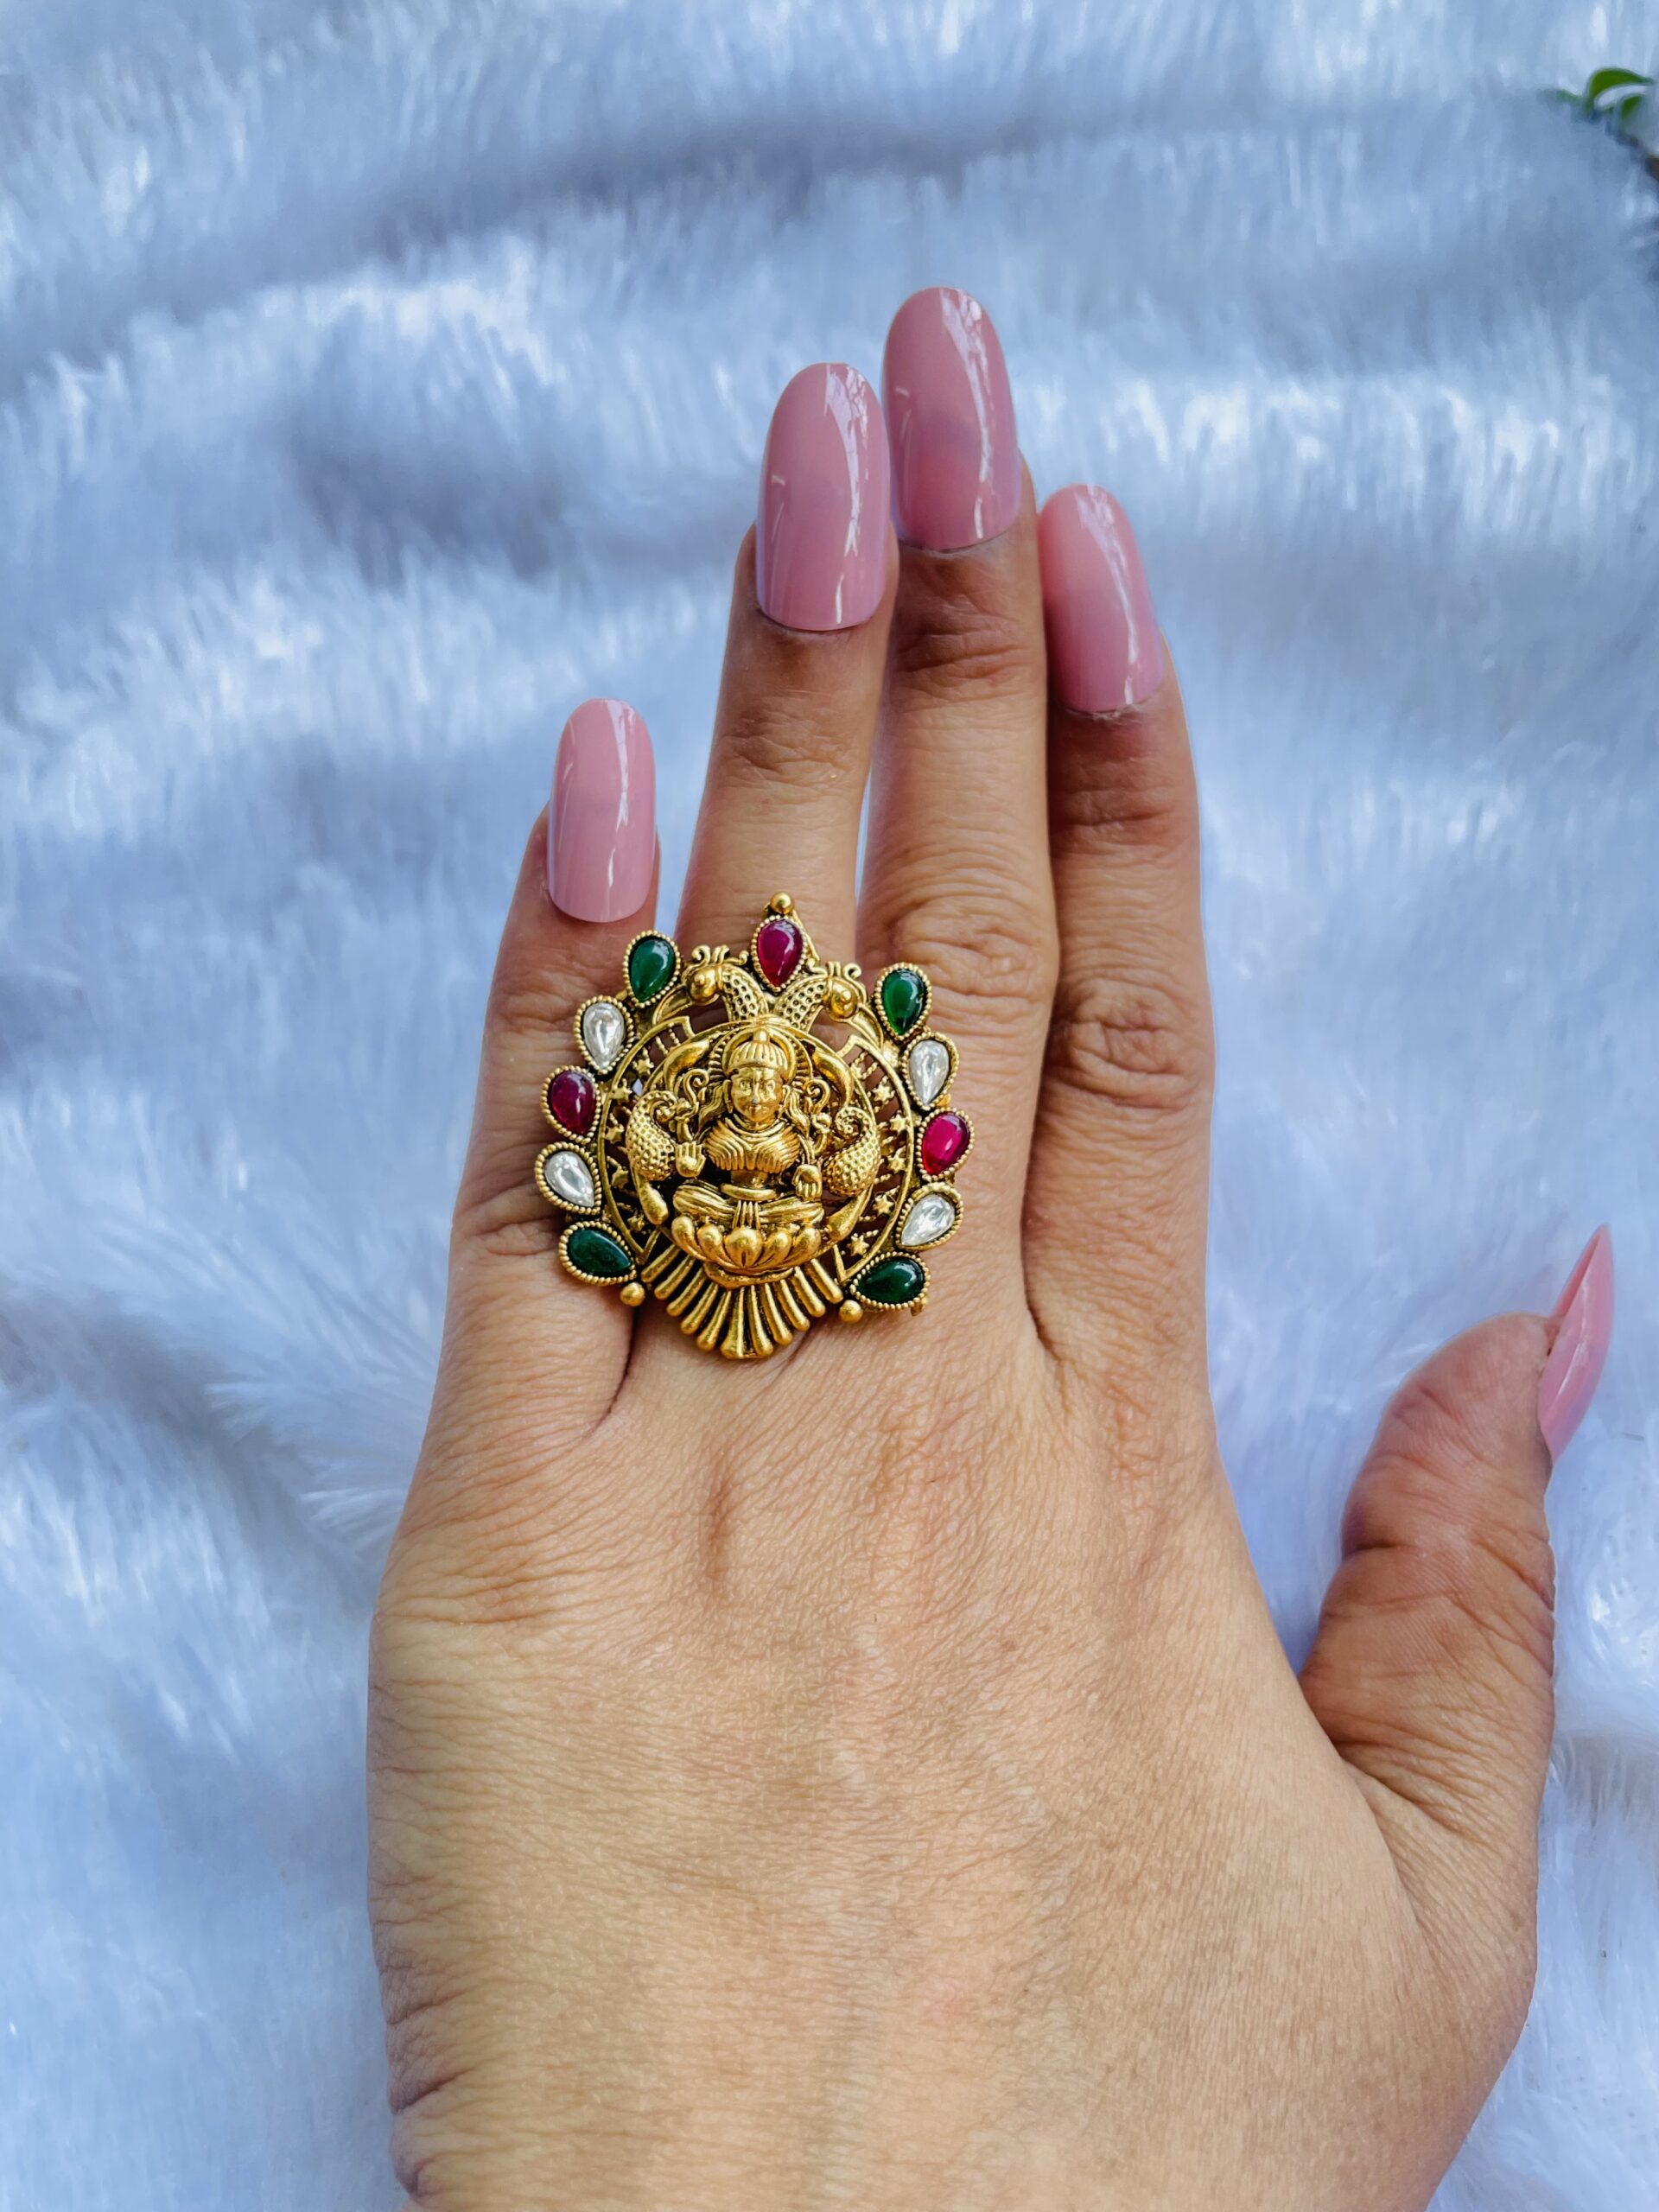 Buy quality Round Shape Gold Temple Jewellery Ring in Pune